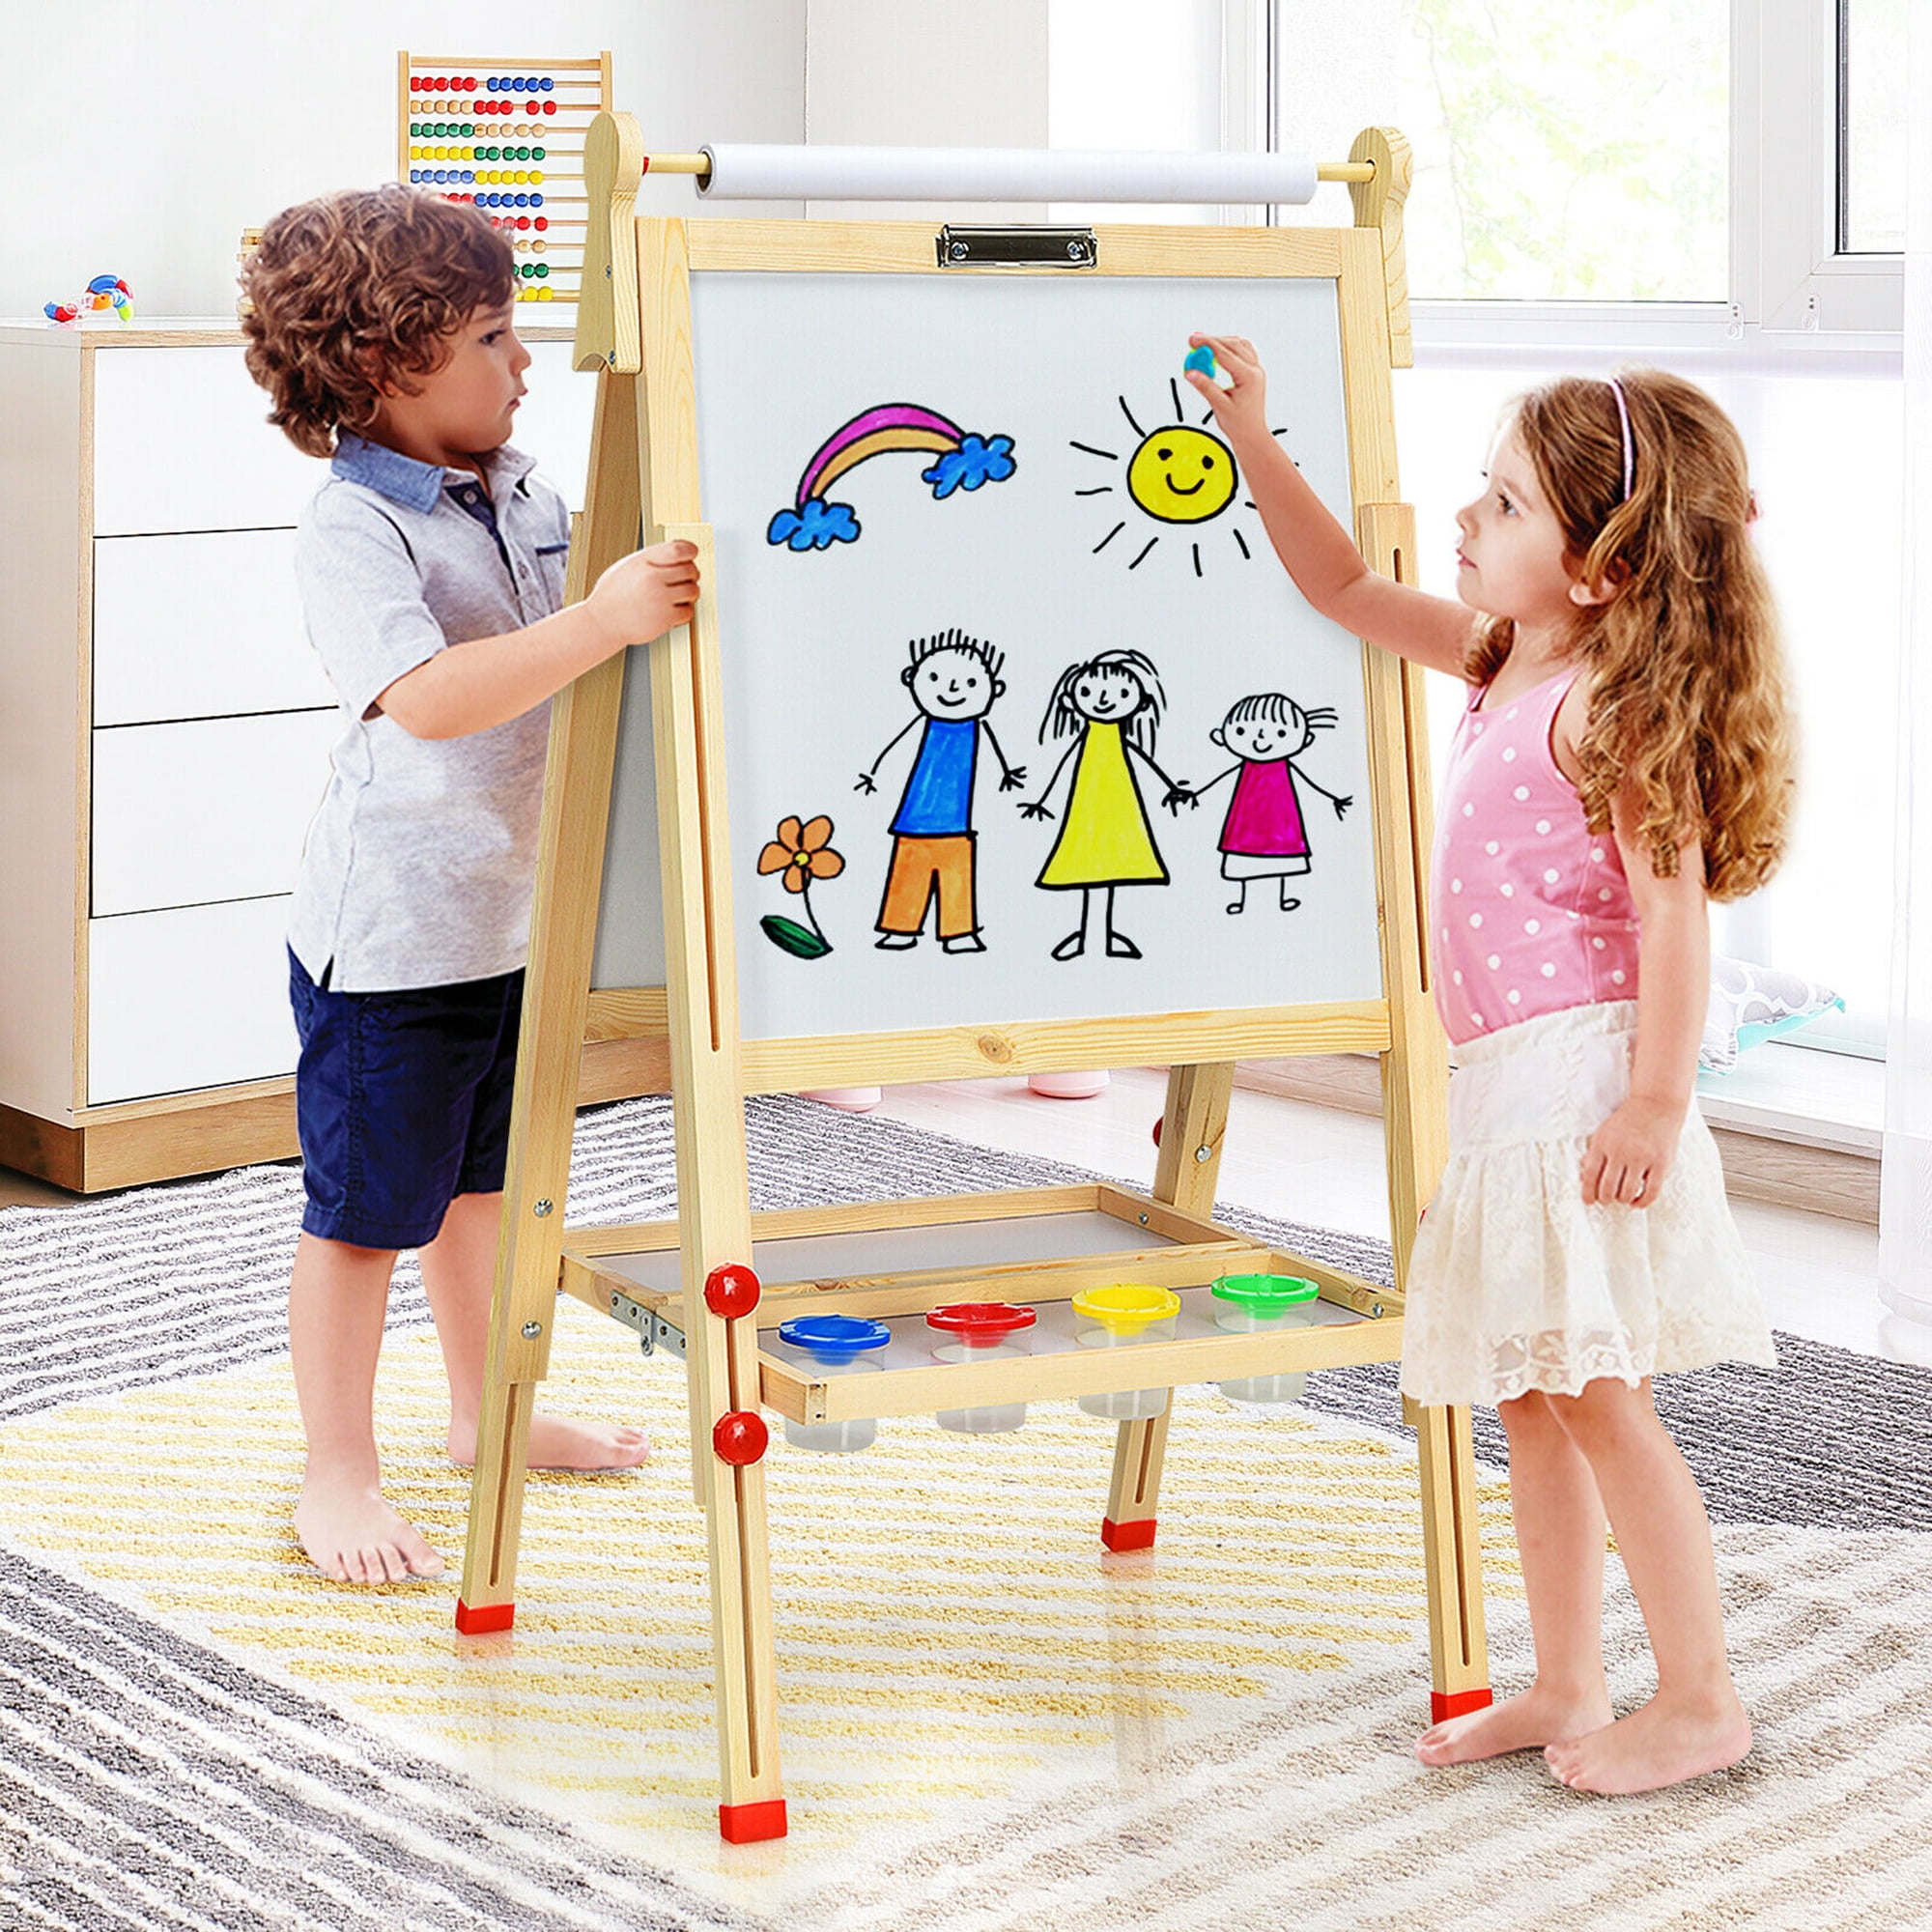 86 Pieces Double Sided Trifold Easel Art Set For Kids 6-12 Drawing